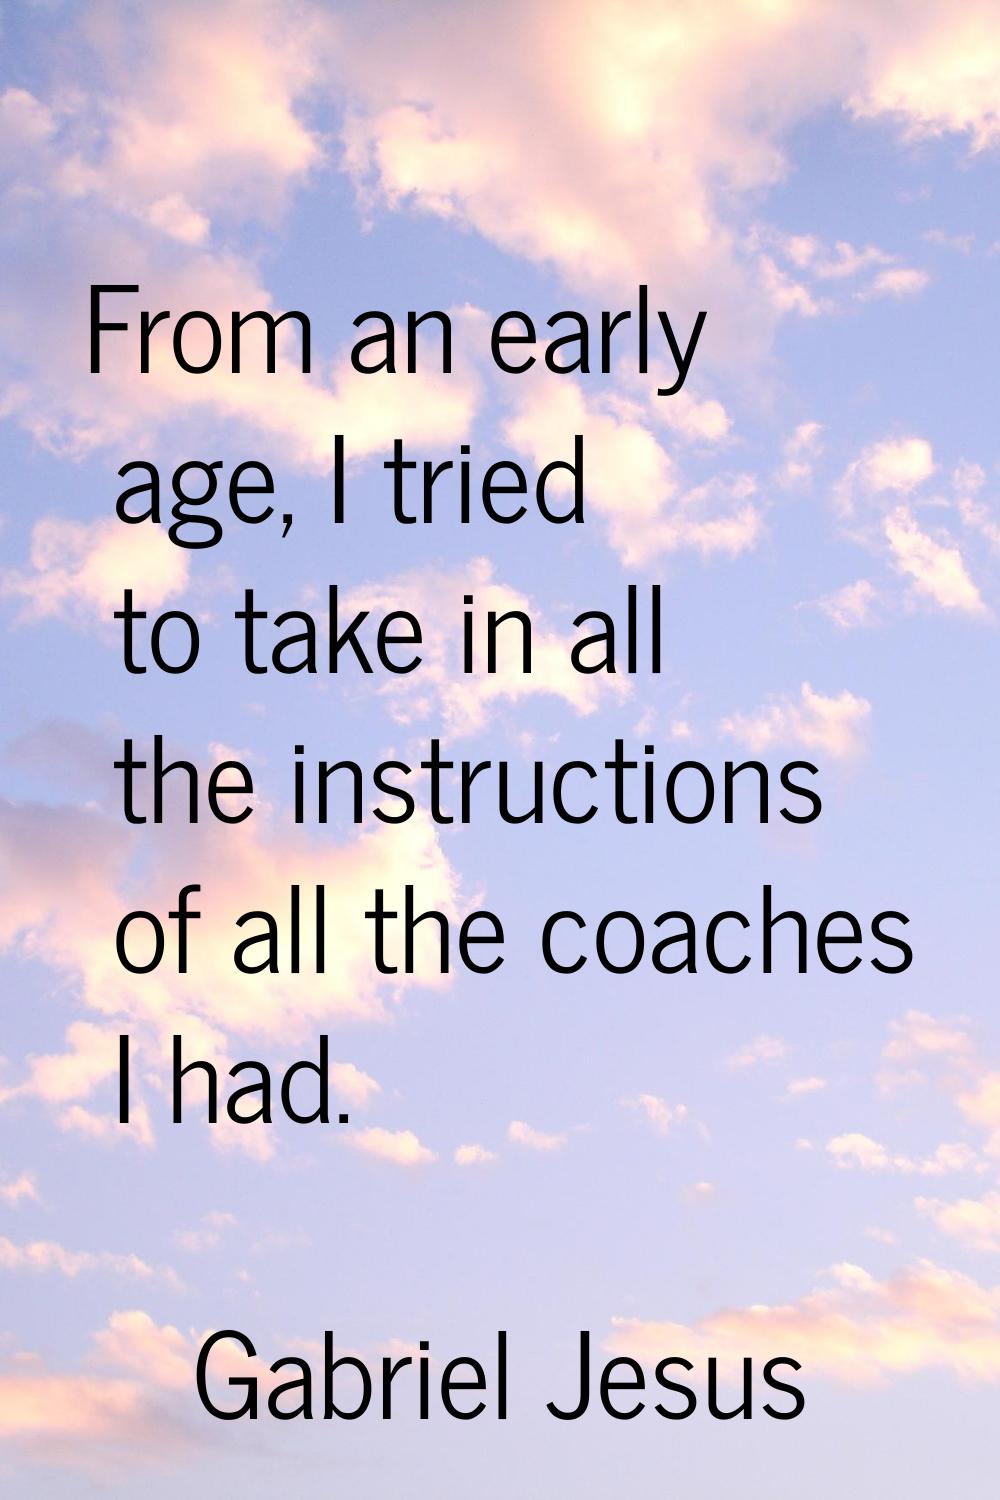 From an early age, I tried to take in all the instructions of all the coaches I had.